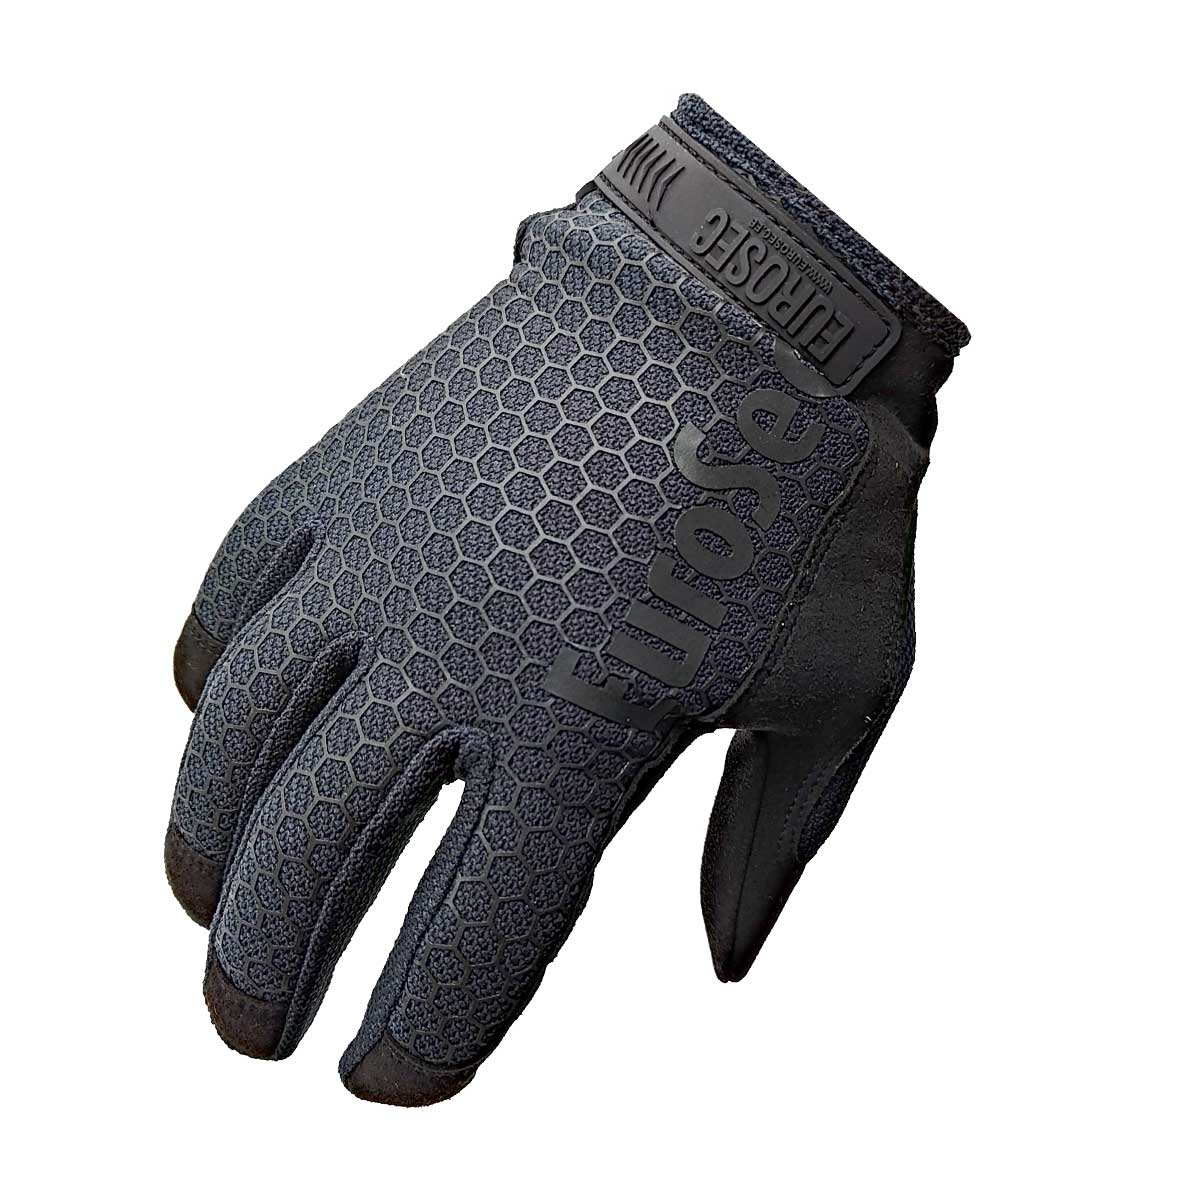 Eurosec Duty Glove (Chiron E-Suede Touch)